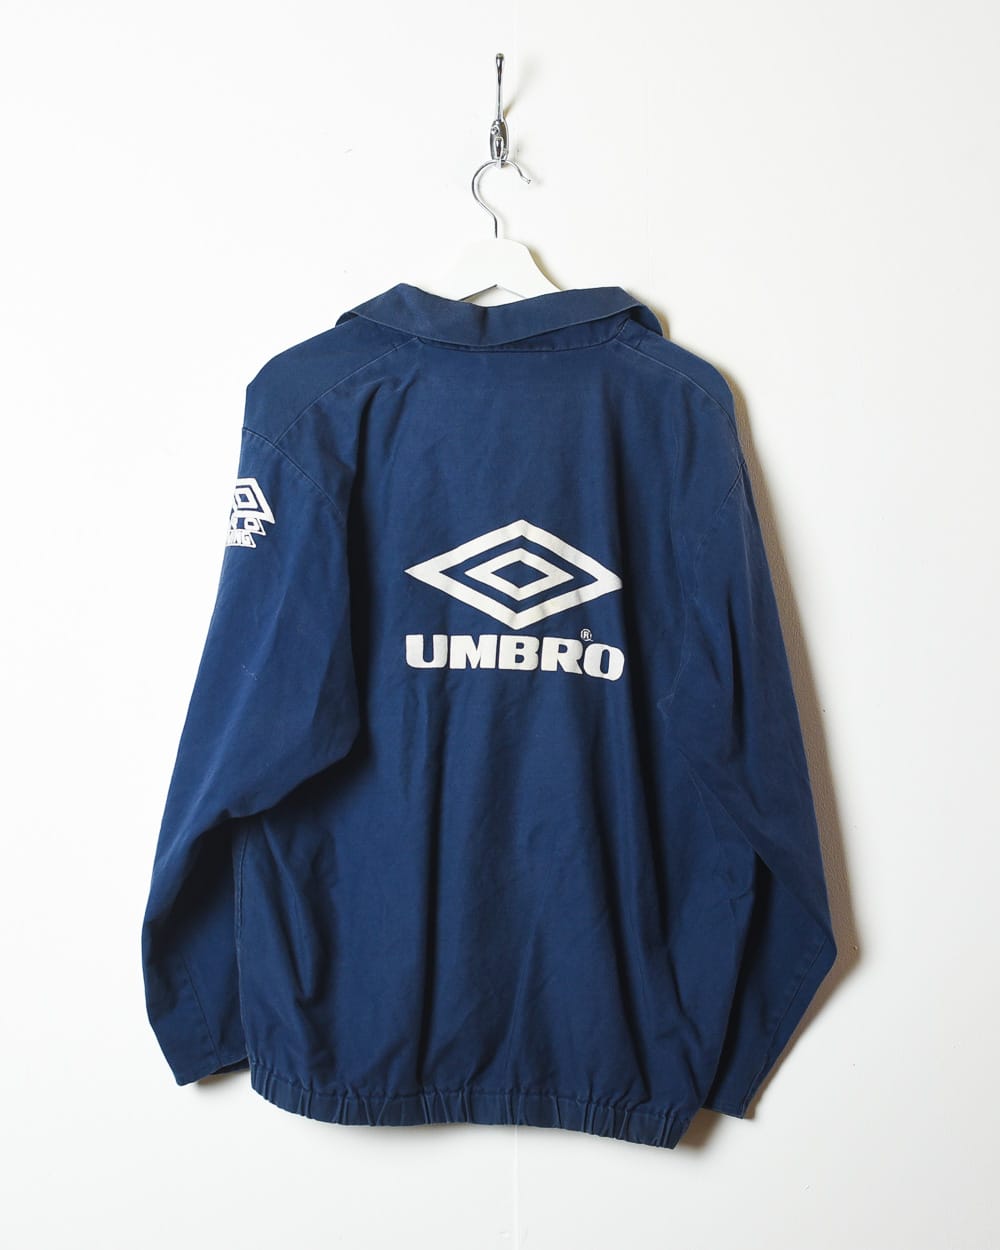 Vintage 90s Navy Umbro Pullover Drill Jacket - Large Cotton 